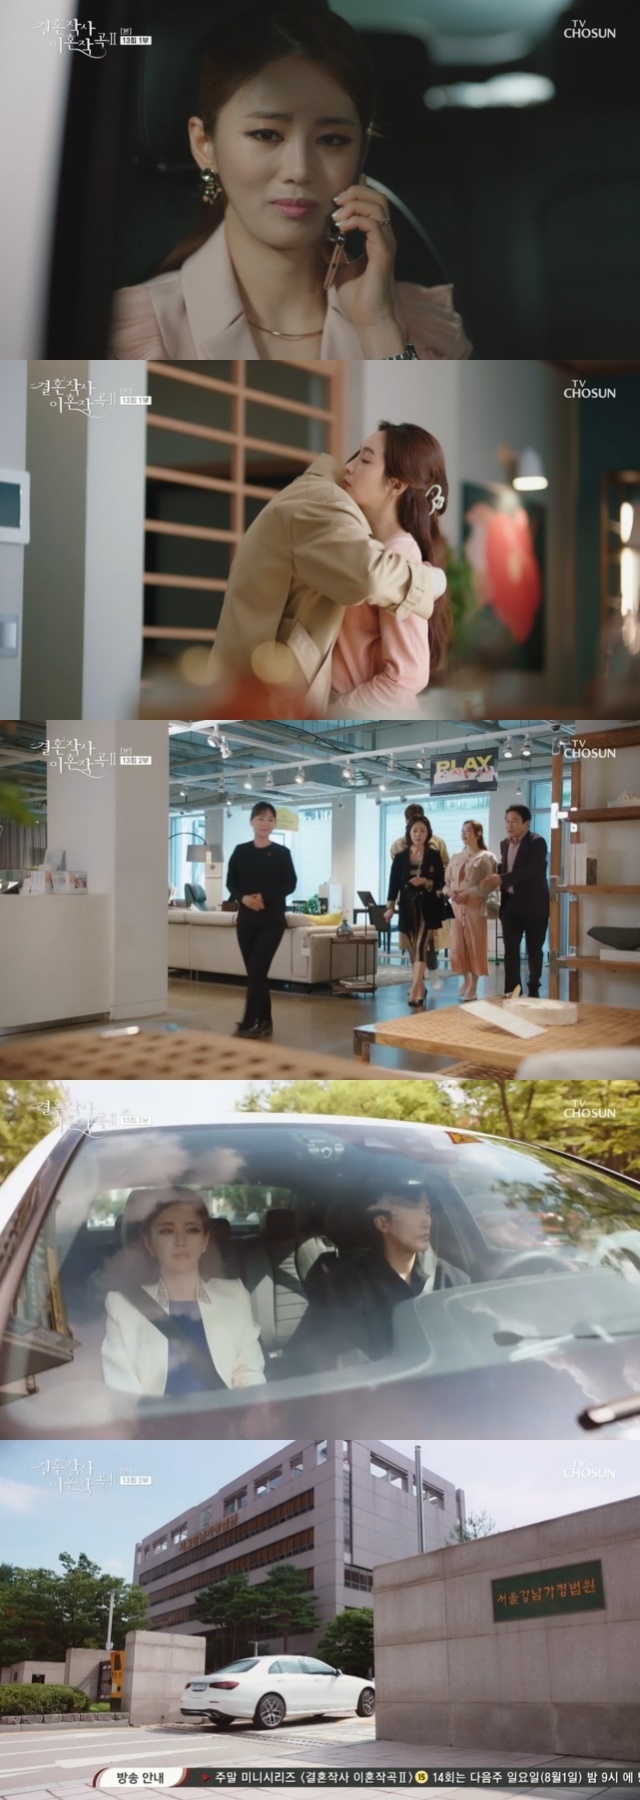 Lee Ga-ryung hid the fact that he was an Im game with a uterine deformity and decided to diverce, and was promised Cheongdam Villa by Laws.In the 13th episode of the TV Chosun Saturday drama The Composed of Marriage Writing Divorce 2 (Im Sung-han), directed by Yoo Jung-jun, Lee Seung-hoon), which was broadcast on July 24, Lee Si-eun (Jeon Soo-kyung) and Safi Young (Park Joo-mi) were shown by Bo Hye-ryong (Lee Ga-ryung), who decided to divorce.On this day, Bu Hye-ryong asked her husband, Judiciary Hyun (Sung Hoon), to change her mind suddenly and go to Laws.Without any explanation to the judge, Bu Hye-ryong, who was gathered from his parents-in-law Panmunho (Kim Eung-soo) and So Ye-jeong (Lee Jong-nam), declared the bomb saying, I will give you a divorce.Buhye-ryong, who insisted on never being able to do the same as the diverce throughout, explained that the sudden change of mind was thinking of the judge.In the movie theater, the judge looked at the pregnant woman who passed by without knowing her, and the expression was so sad.I do not think I should have a father when I am born, said Buhye.Instead, she decided to receive a top-of-the-line Villa in exchange for a divorce, when Buhye-ryong suggested the transfer of the name of the house where Panmunho currently lives as alimony, saying, I am not confident of living in that house alone.Can you do the Cheongdam Villa? Judge Hyun was embarrassed by saying, Is not it where the chaebol live there? However, Panmunho, who was excited to think that he would legally put Song Won (Lee Min-young) into his daughter-in-law, agreed, Recognize the sale.He decided to receive the house holding tax and maintenance expenses.After that, Panmunho said, The date of the body was approaching and the heart was frustrating. I promised that Father of color would not see his face even if he was born with blood.It is a sad story, but it is tearful in the song won position.I feel sorry for my blood, he said, and more than anyone else, the two of them wanted to meet a good man in the future to make themselves comfortable.She also described the real reason for her decision to give birth to a child, and she called her mother, who was hiding in a car and secretly living in Canada, and foreseen that the child would soon be sent.And for the reason of the divorce, I am wrong about the book, but I have a problem. The uterus is deformed.I dont want to be a pregnancy in a hospital. Laws dont know. Just because Im here and there.Tell Father well. Dont worry too much. Dont worry about me. Its your mothers daughter. The judge, who did not know the circumstances of this kind of vice-minister, ran to God or song won. As soon as he saw song won, he hugged I missed it so much and said, I decided to go to court tomorrow.We have to marry as soon as we can get together as soon as we can. Her parents were similar.As soon as the day came, they came to song won and said, I will accept the documents tomorrow, buy the house in the afternoon, and finish it with the day, The baby in the boat is a puddle, and I did not sleep because yesterdays work seemed to be solved.The four of them went to see a new house to fill the newlyweds like a family.The separation between the two was neat. The judge gave the last breakfast that the judge wanted so much, saying, If you are born, please call me, too.She also asked, Im a good decision model Behavior? And then she said, Now I come and say, I regret this.It is useless, but there is a part of the pt authority that I provided the cause. He acknowledged that he was responsible for some of the affair.